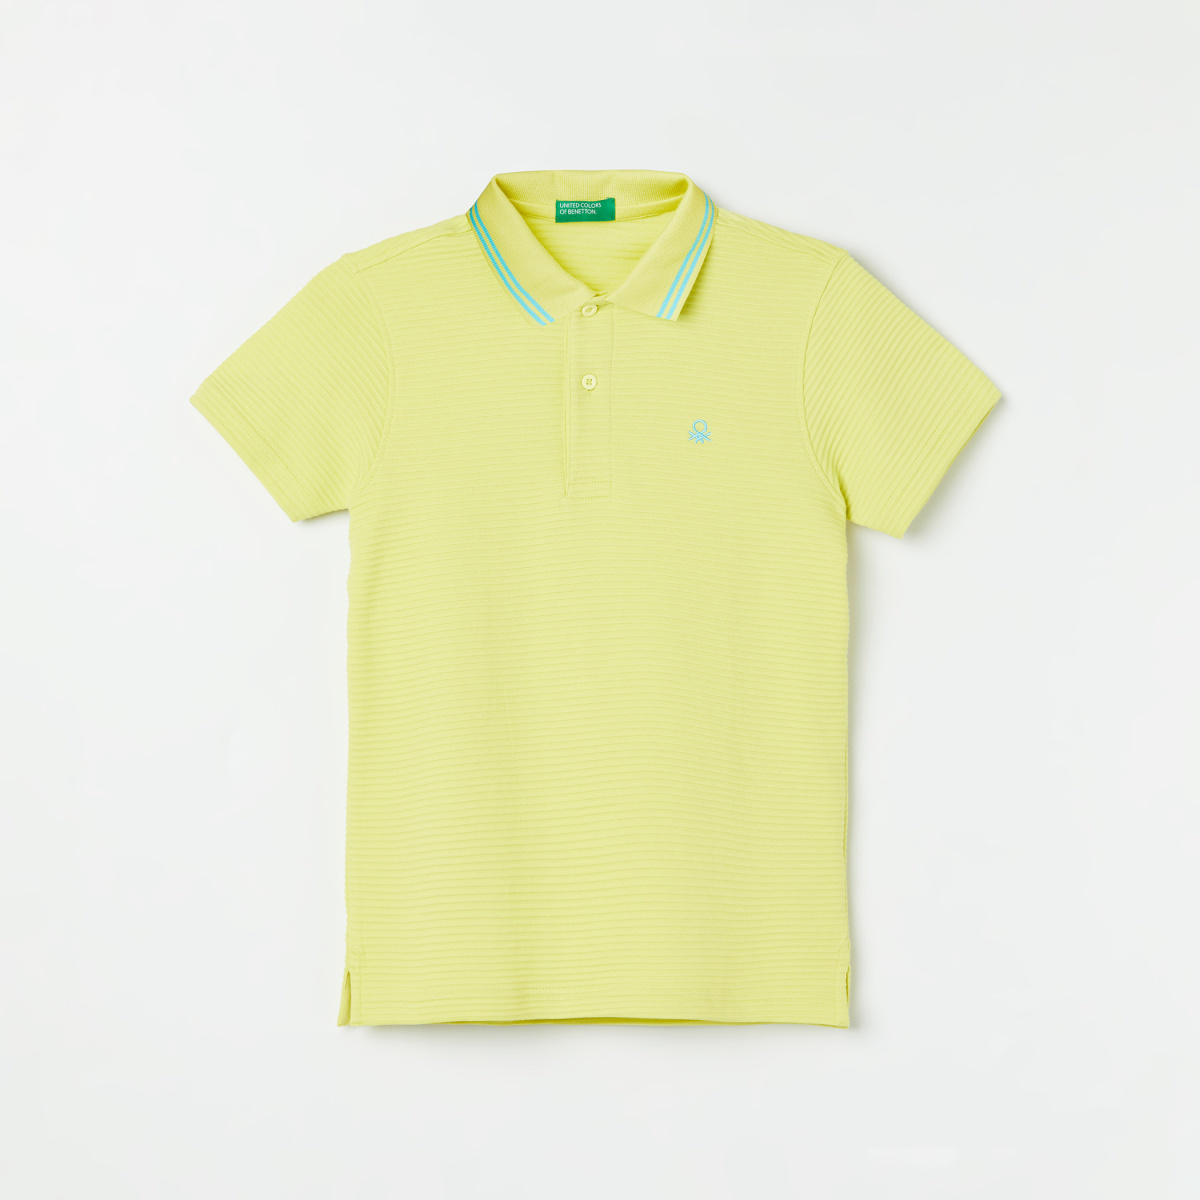 UNITED COLORS OF BENETTON Boys Textured Polo T-shirt